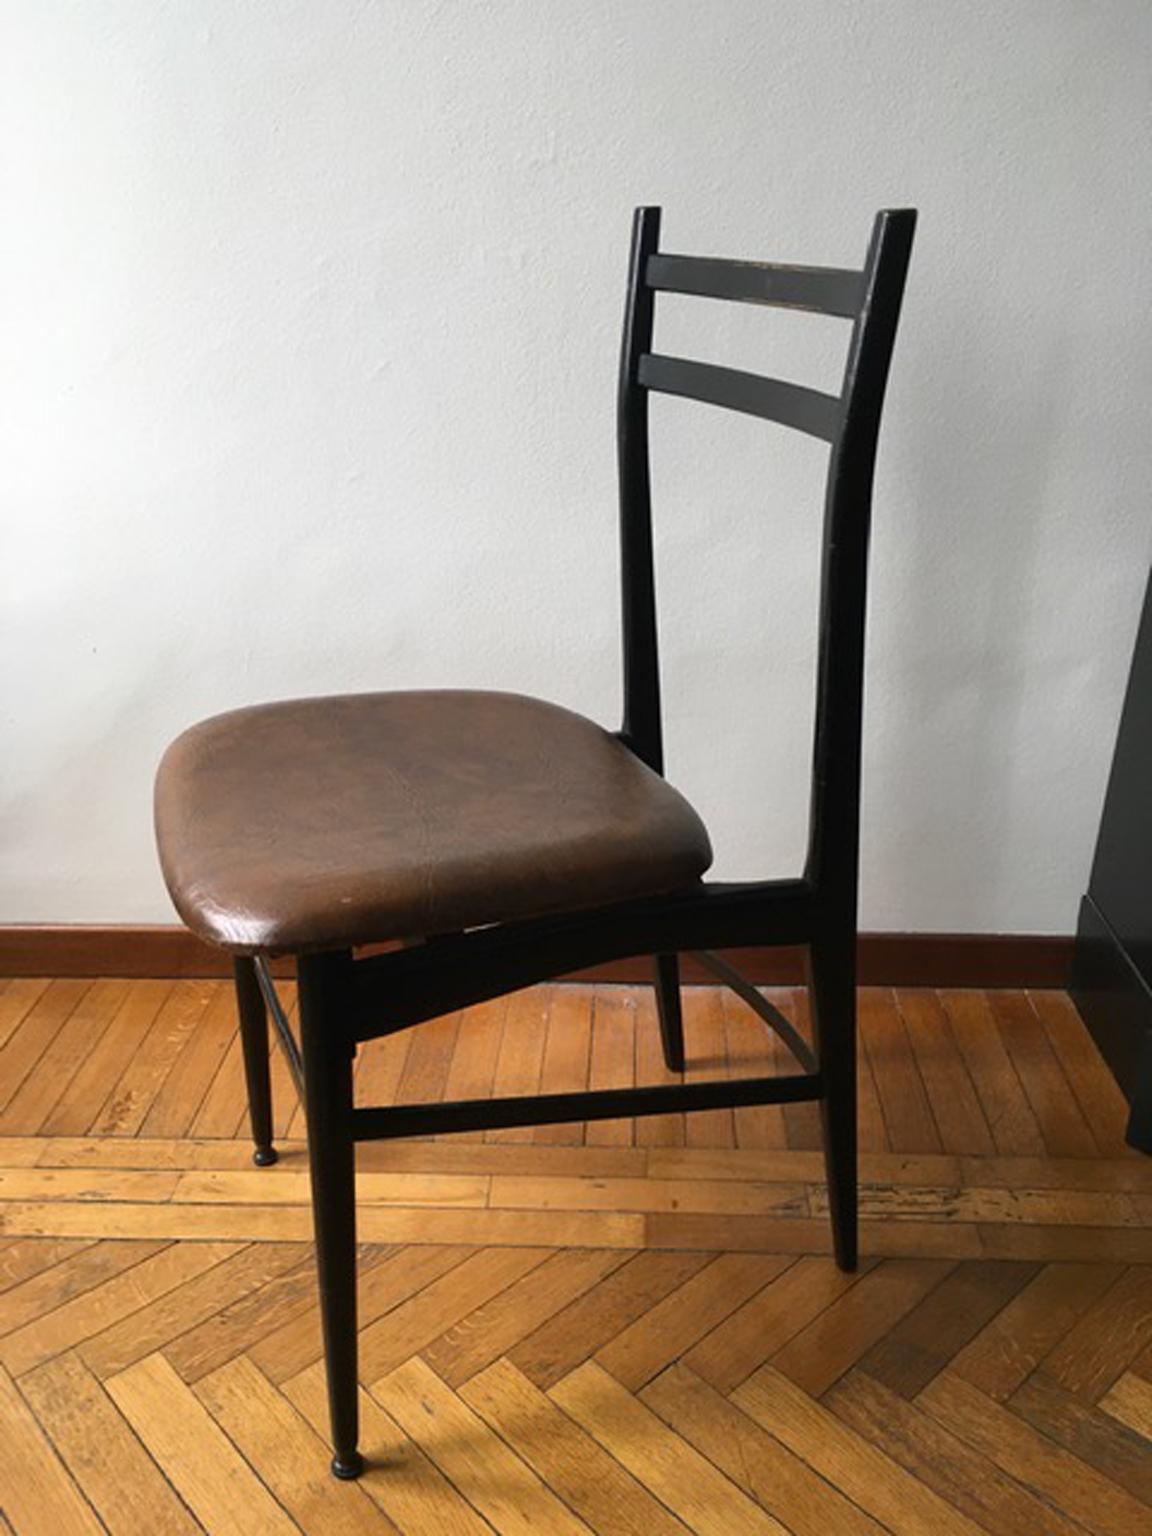 This is an Italian design chair and we can find the style of the well known 